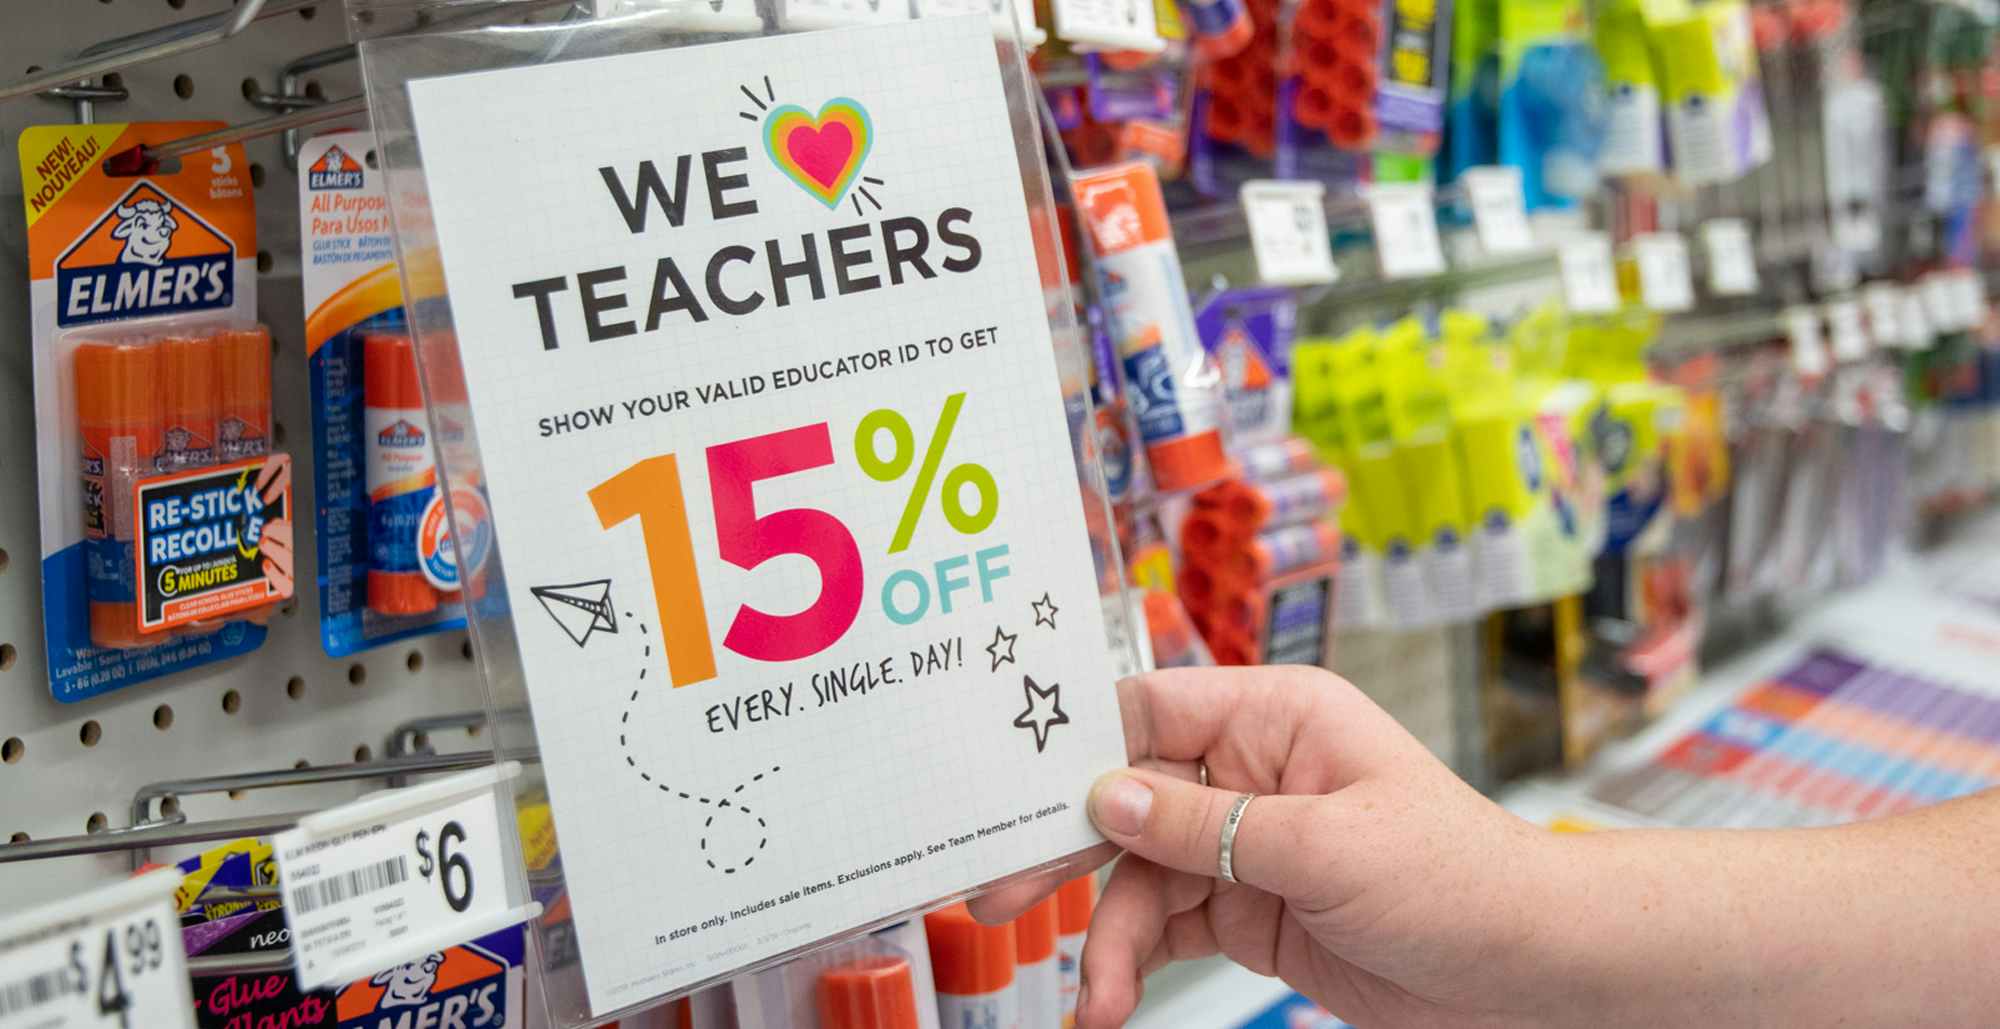 A person's hand lifting a sign on a wall display at Michaels that says "We love teachers" offering 15% off every day with a valid educator ID.